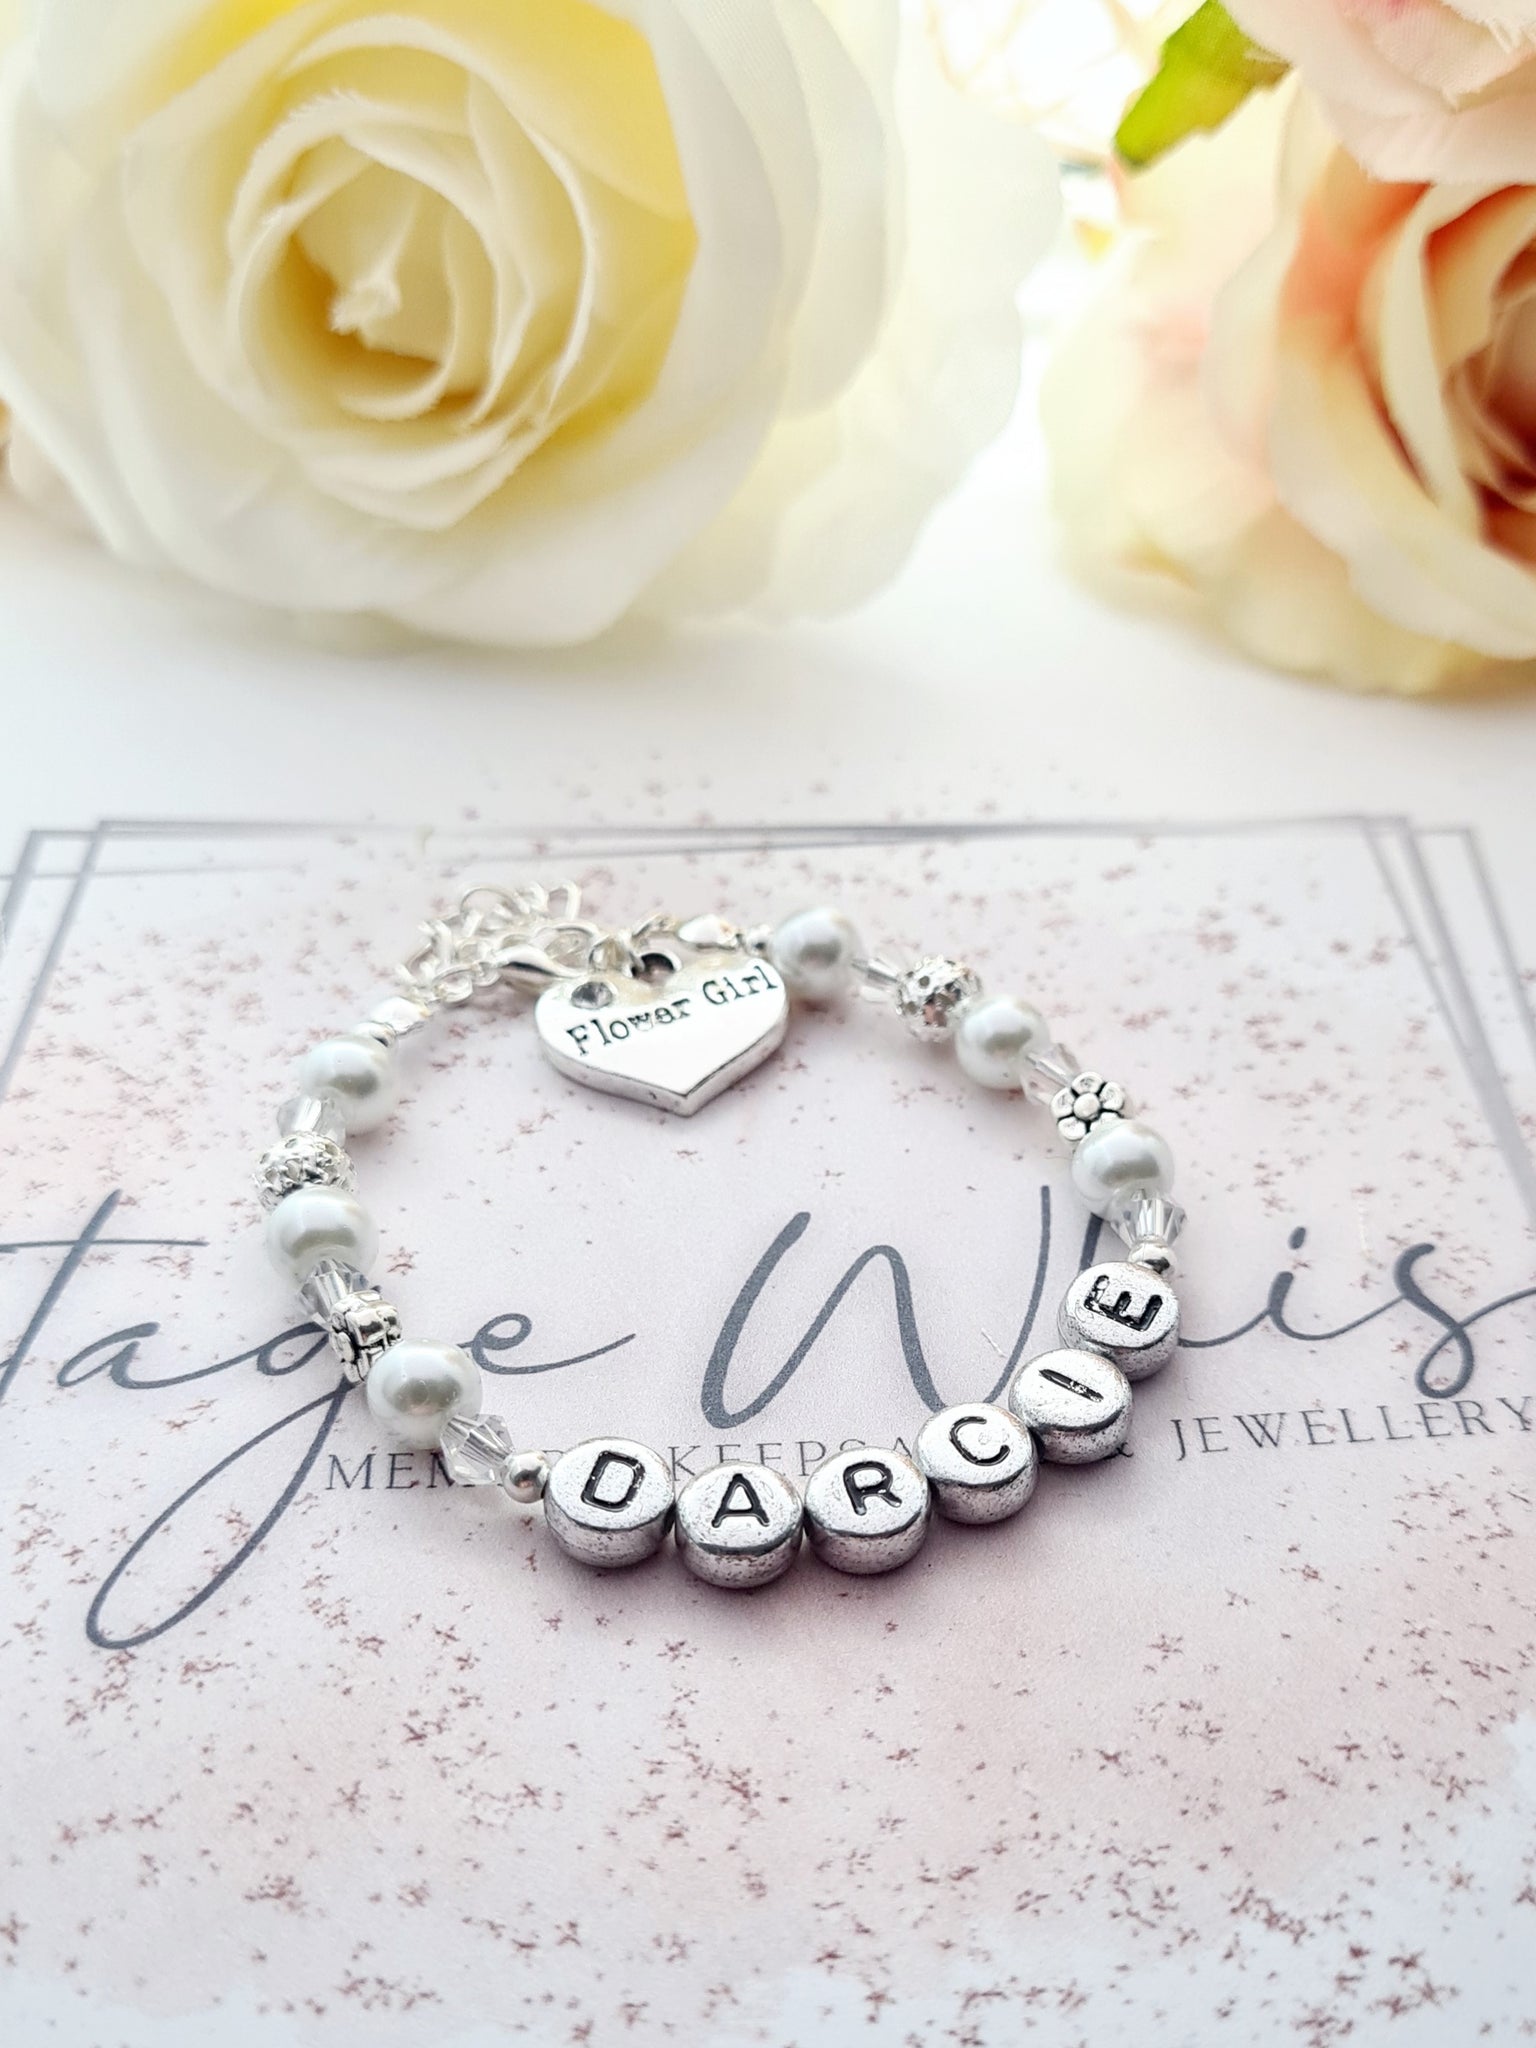 Handmade Personalised bracelet jewellery for girls sister women baby's  Flower girl eid gifts made any charm of choice any size. baby christening  gift : Amazon.co.uk: Handmade Products